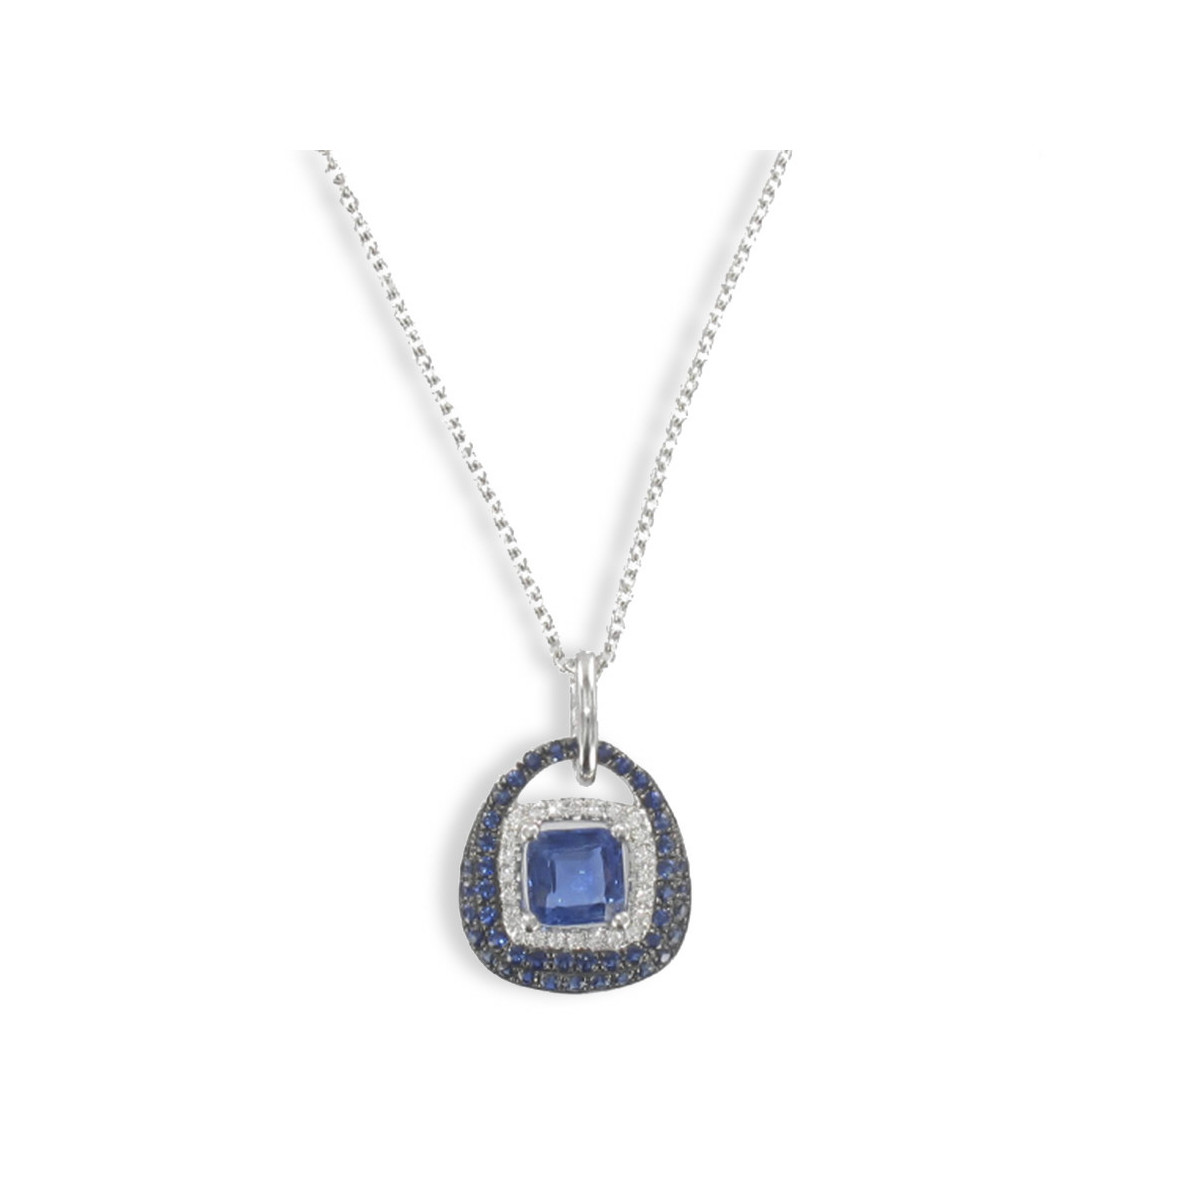 WHITE GOLD KYNITE, SAPPHIRE AND DIAMONDS NECKLACE